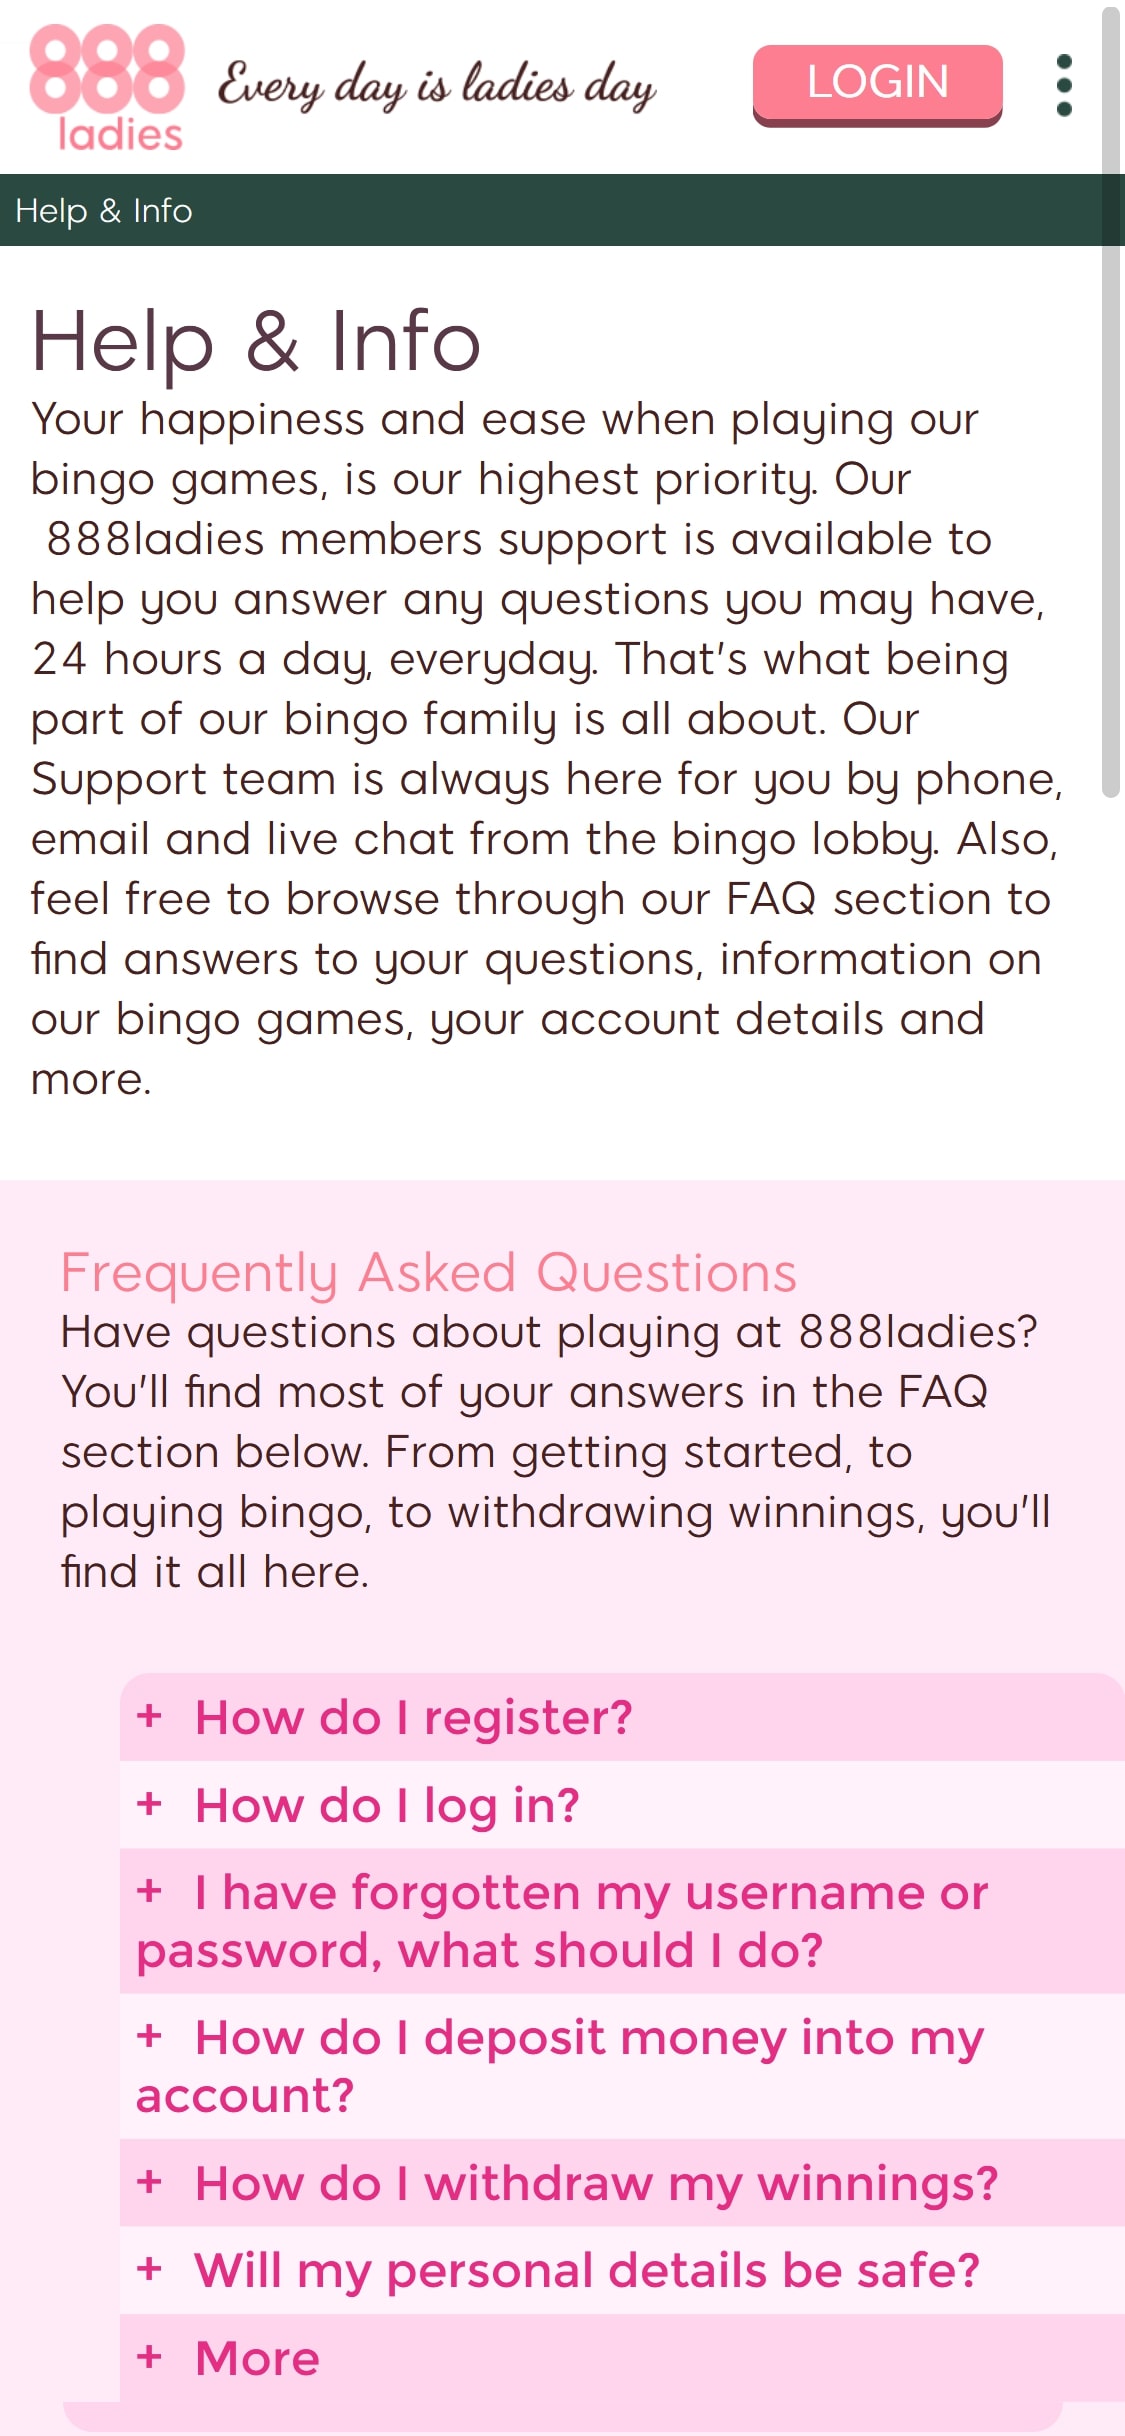 888 Ladies Casino Mobile Support Review